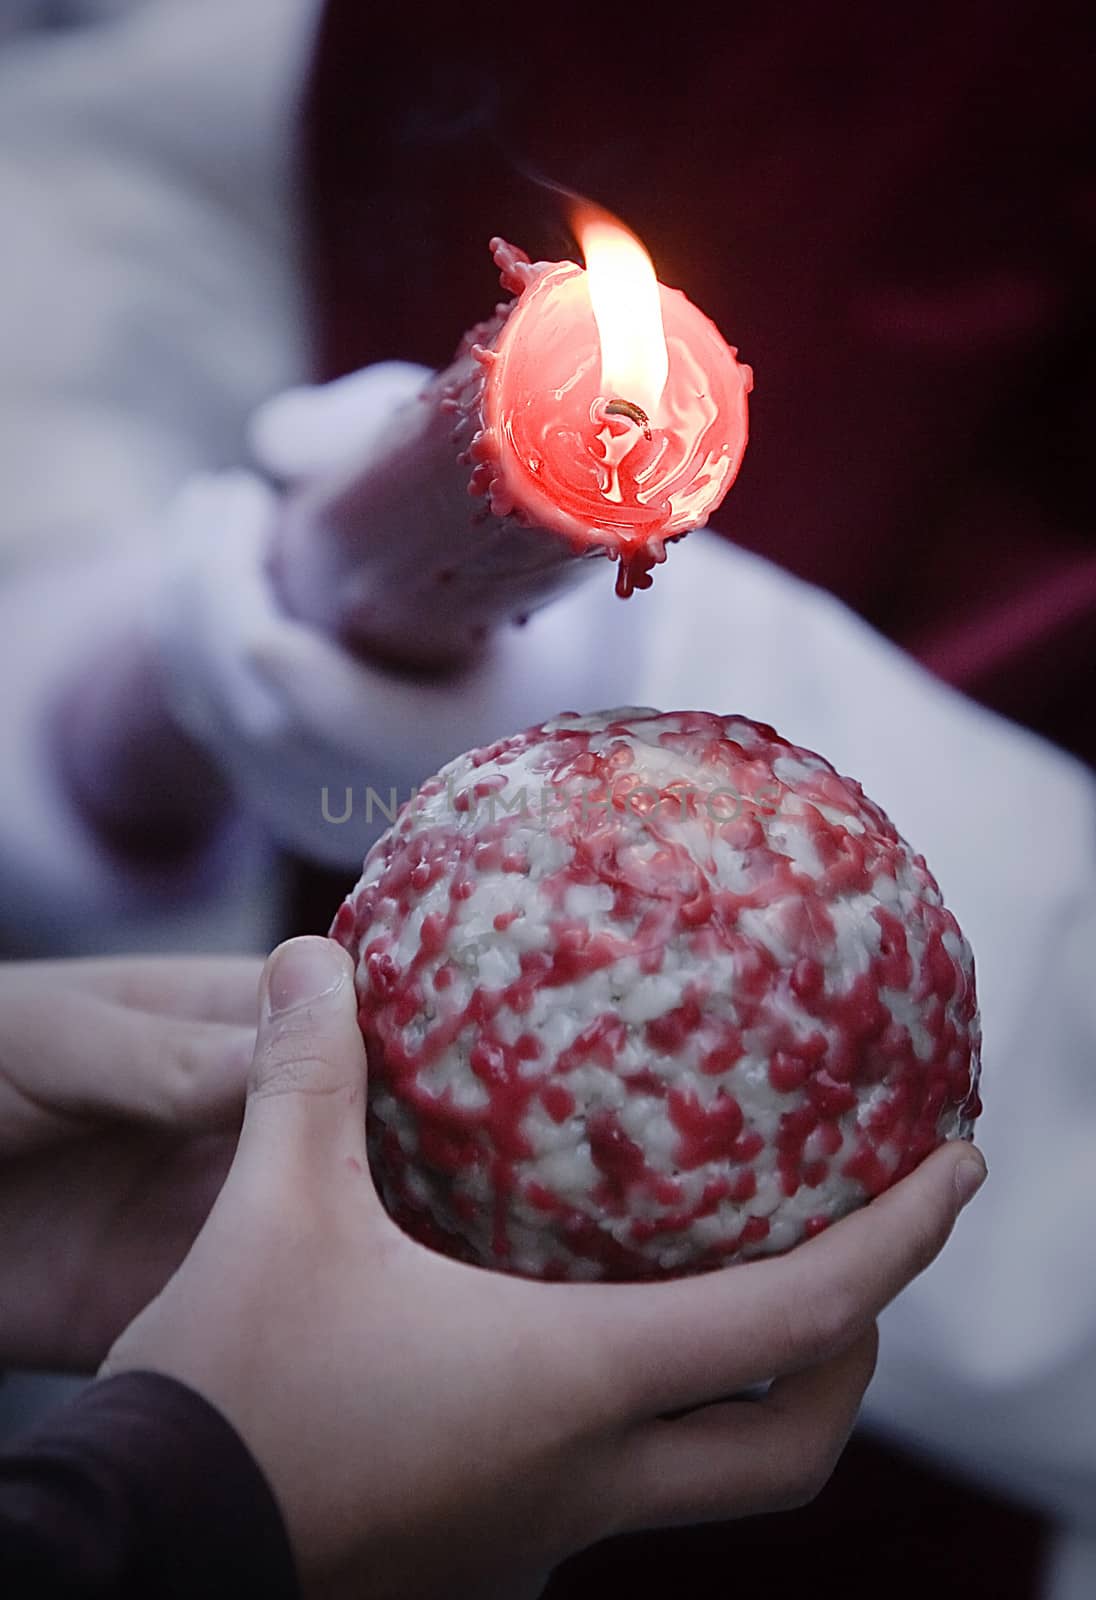 Detail penitent red holding a candle pouring wax on a ball that holds a child in the hand during Holy Week, Spain